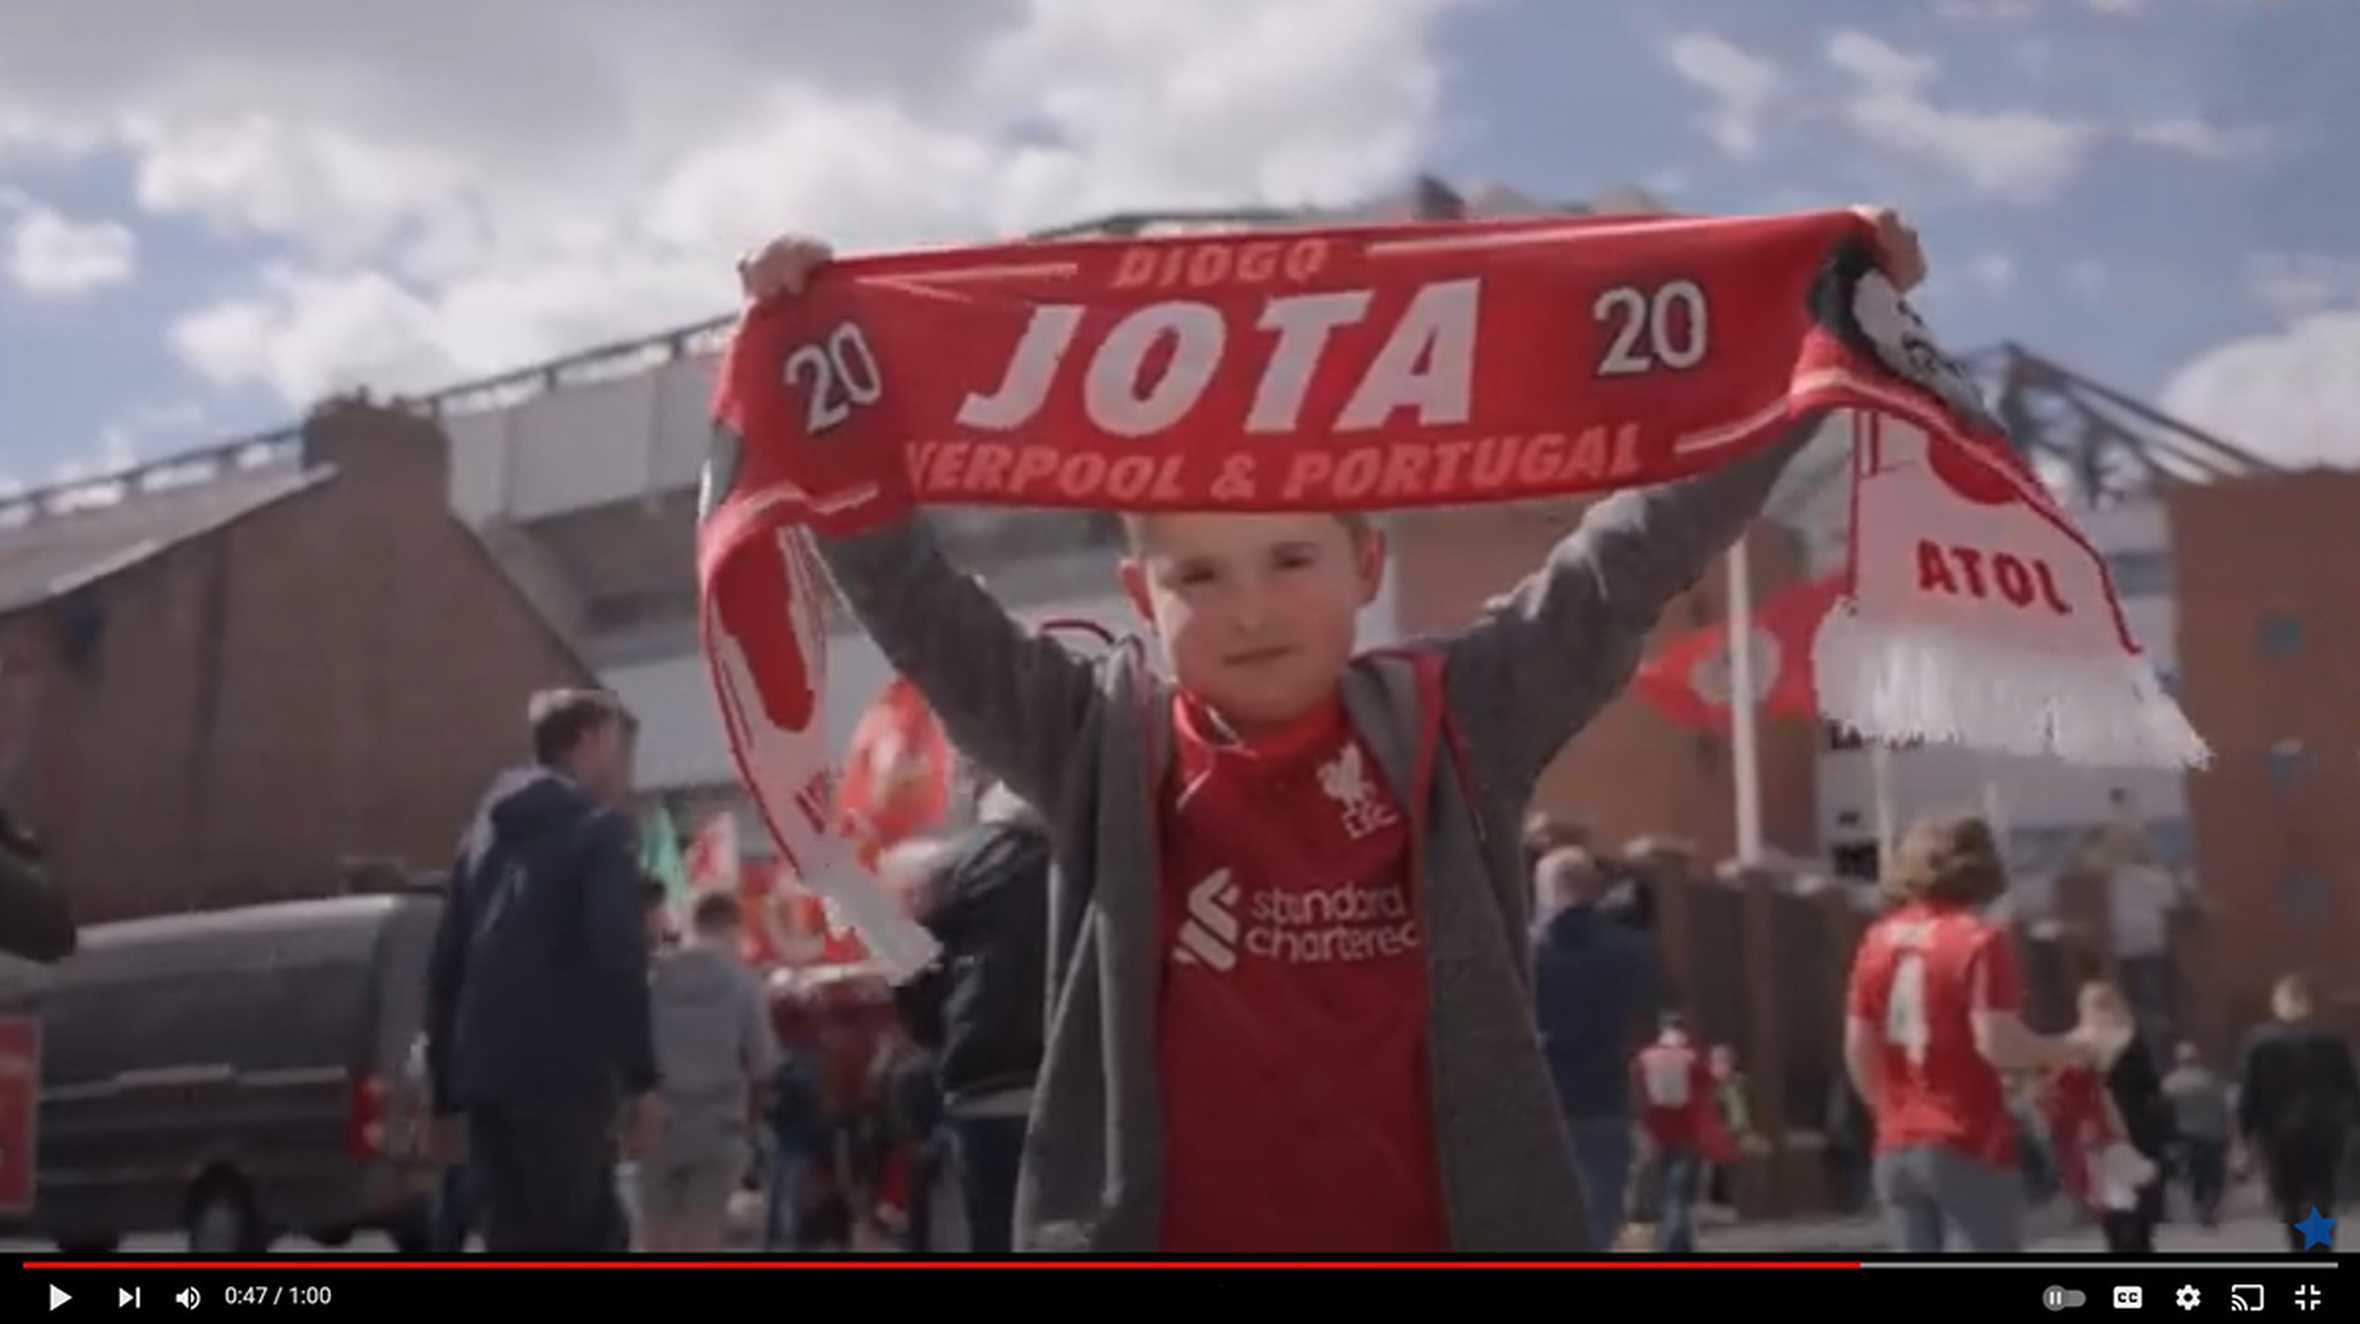 Archie holding up a Liverpool FC scarf outside Anfield Stadium.